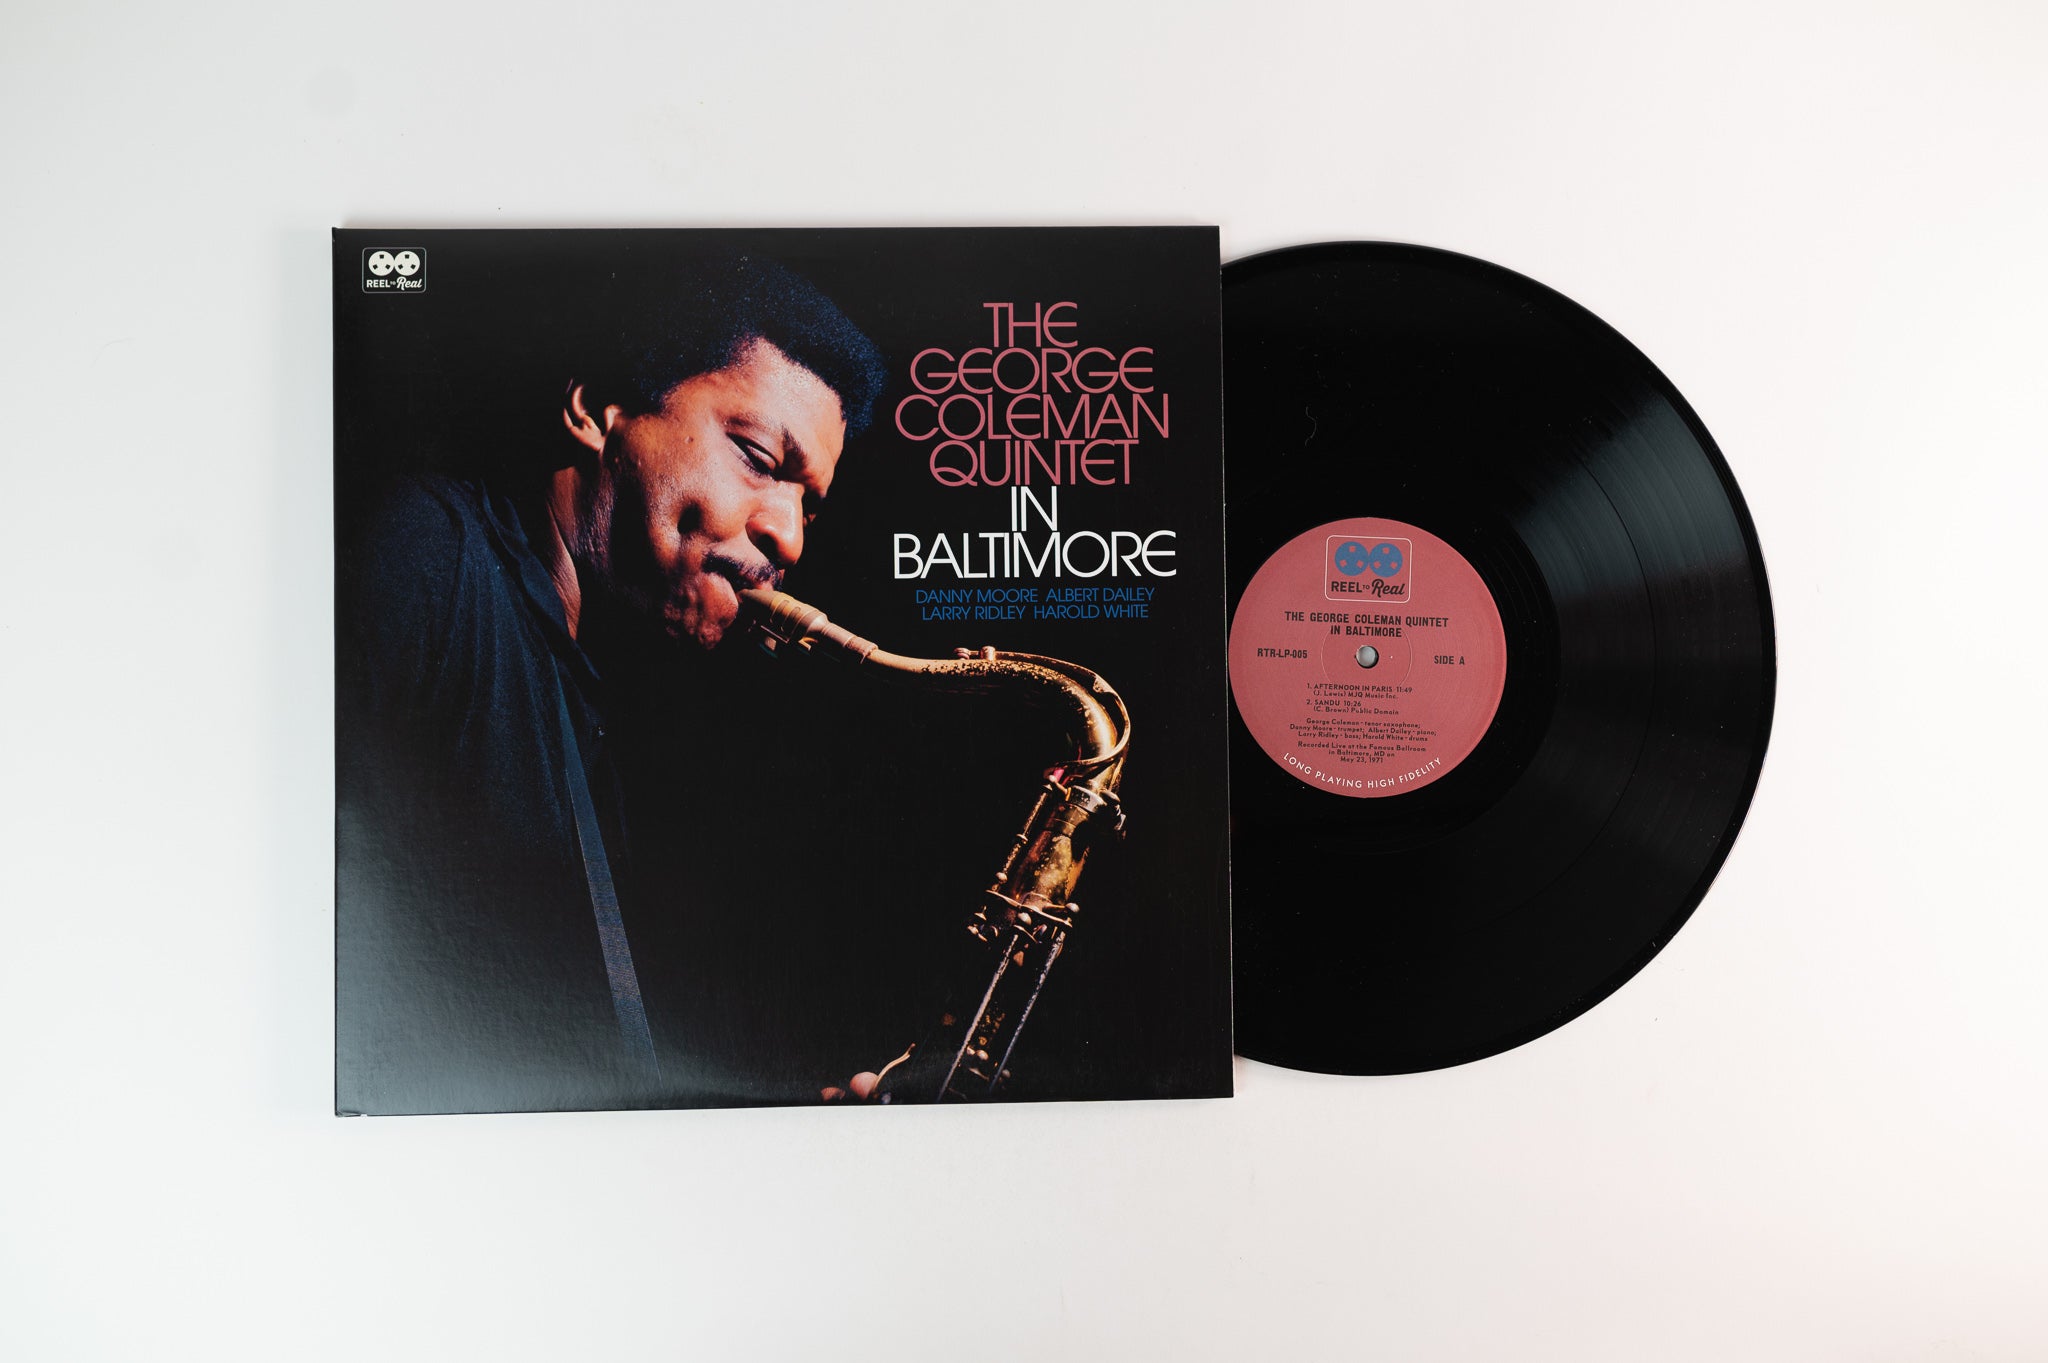 George Coleman - The George Coleman Quintet In Baltimore on Reel to Real Ltd Numbered 180 Gram